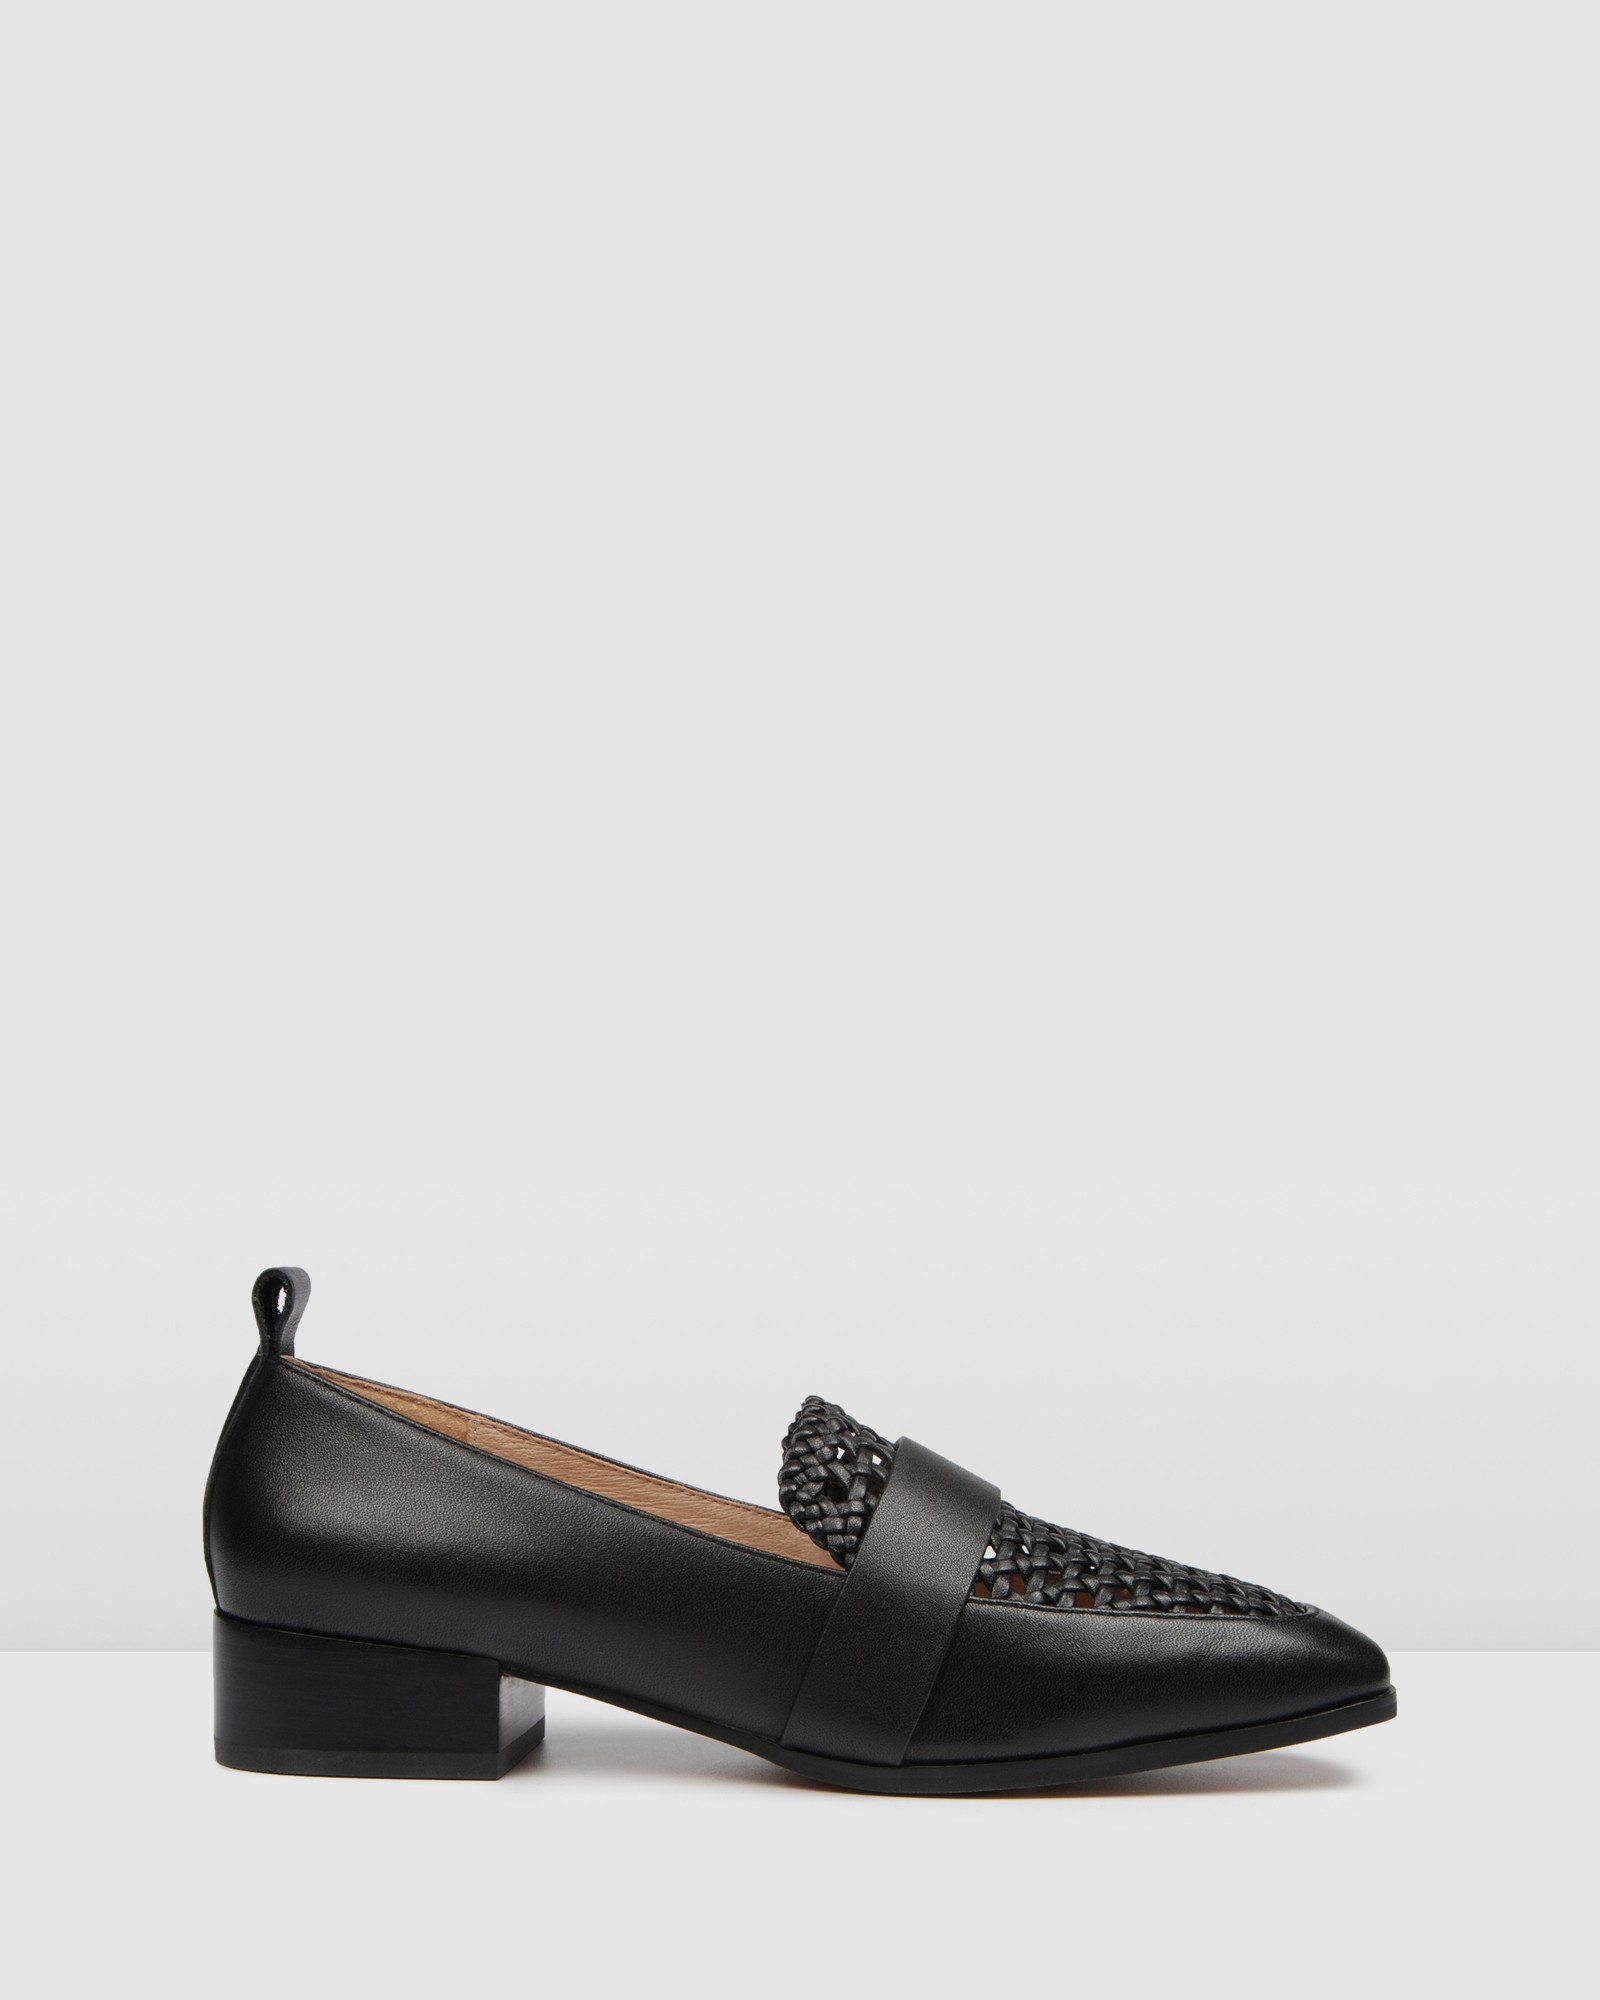 Banner Loafers Black Leather by Jo Mercer | ShoeSales